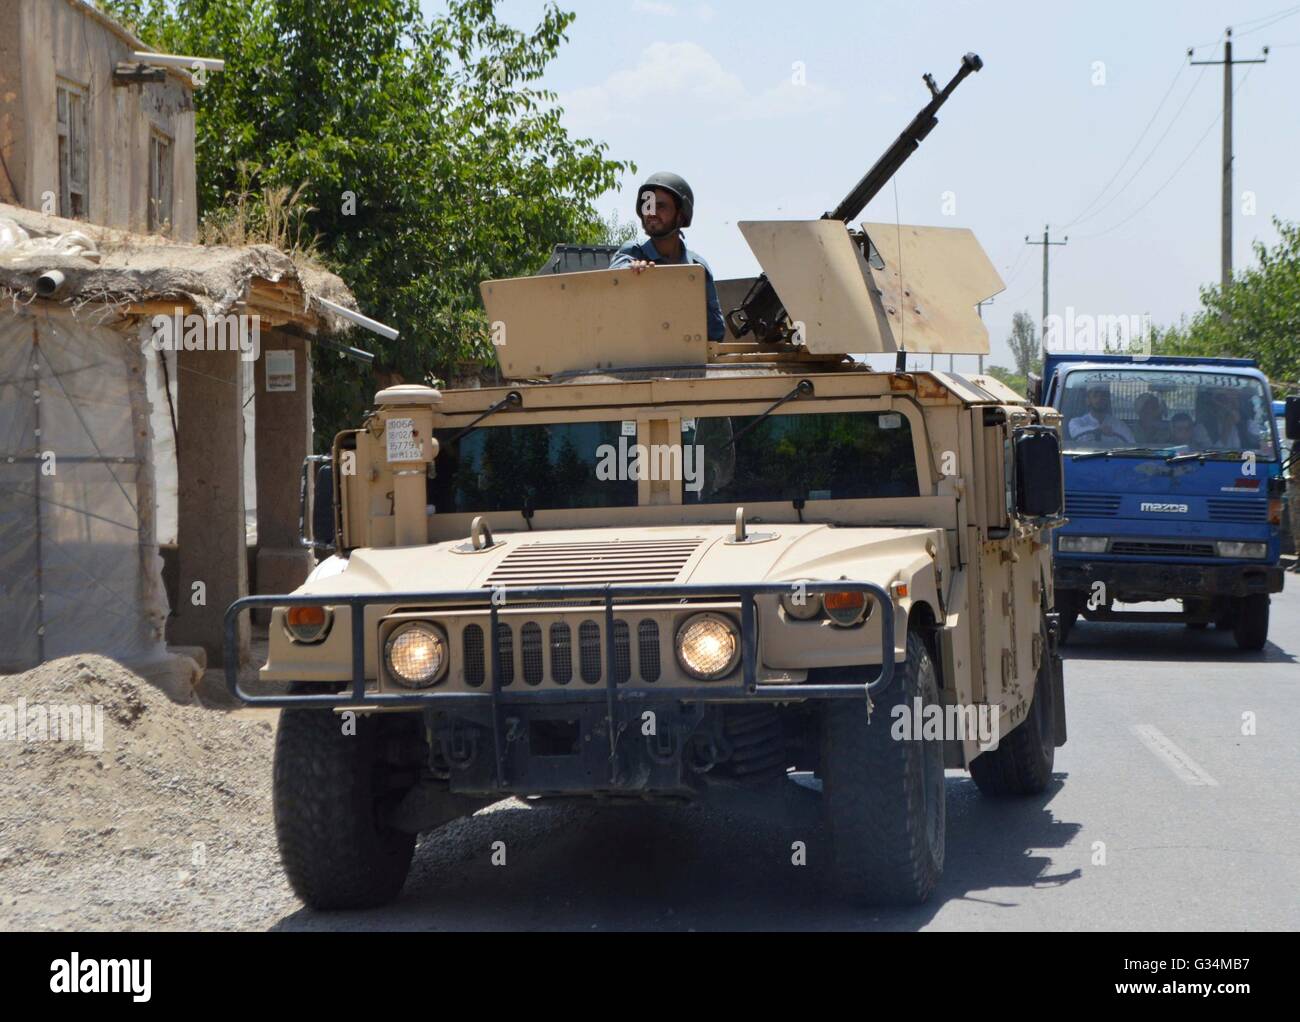 Kunduz, Afghanistan. 8th June, 2016. An Afghan policeman stands on a military vehicle at the site of kidnapping in Kunduz province, Afghanistan, June 8, 2016. Armed militants intercepted a bus along a main roadway in Afghanistan's northern province of Kunduz on Wednesday, kidnapping several passengers, sources said. Credit:  Ajmal Kakar/Xinhua/Alamy Live News Stock Photo